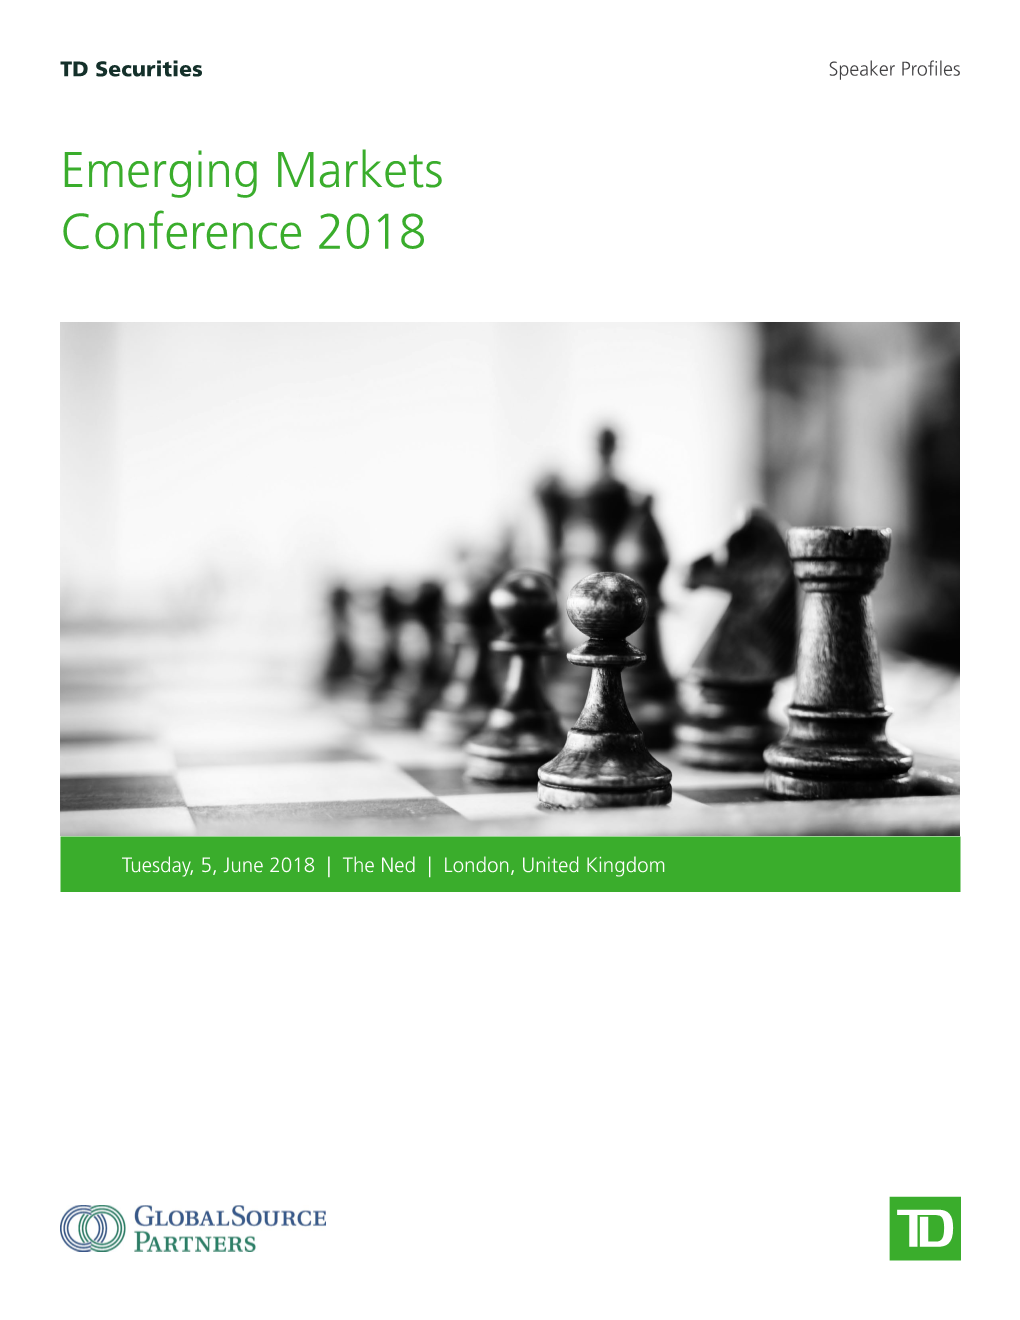 Emerging Markets Conference 2018